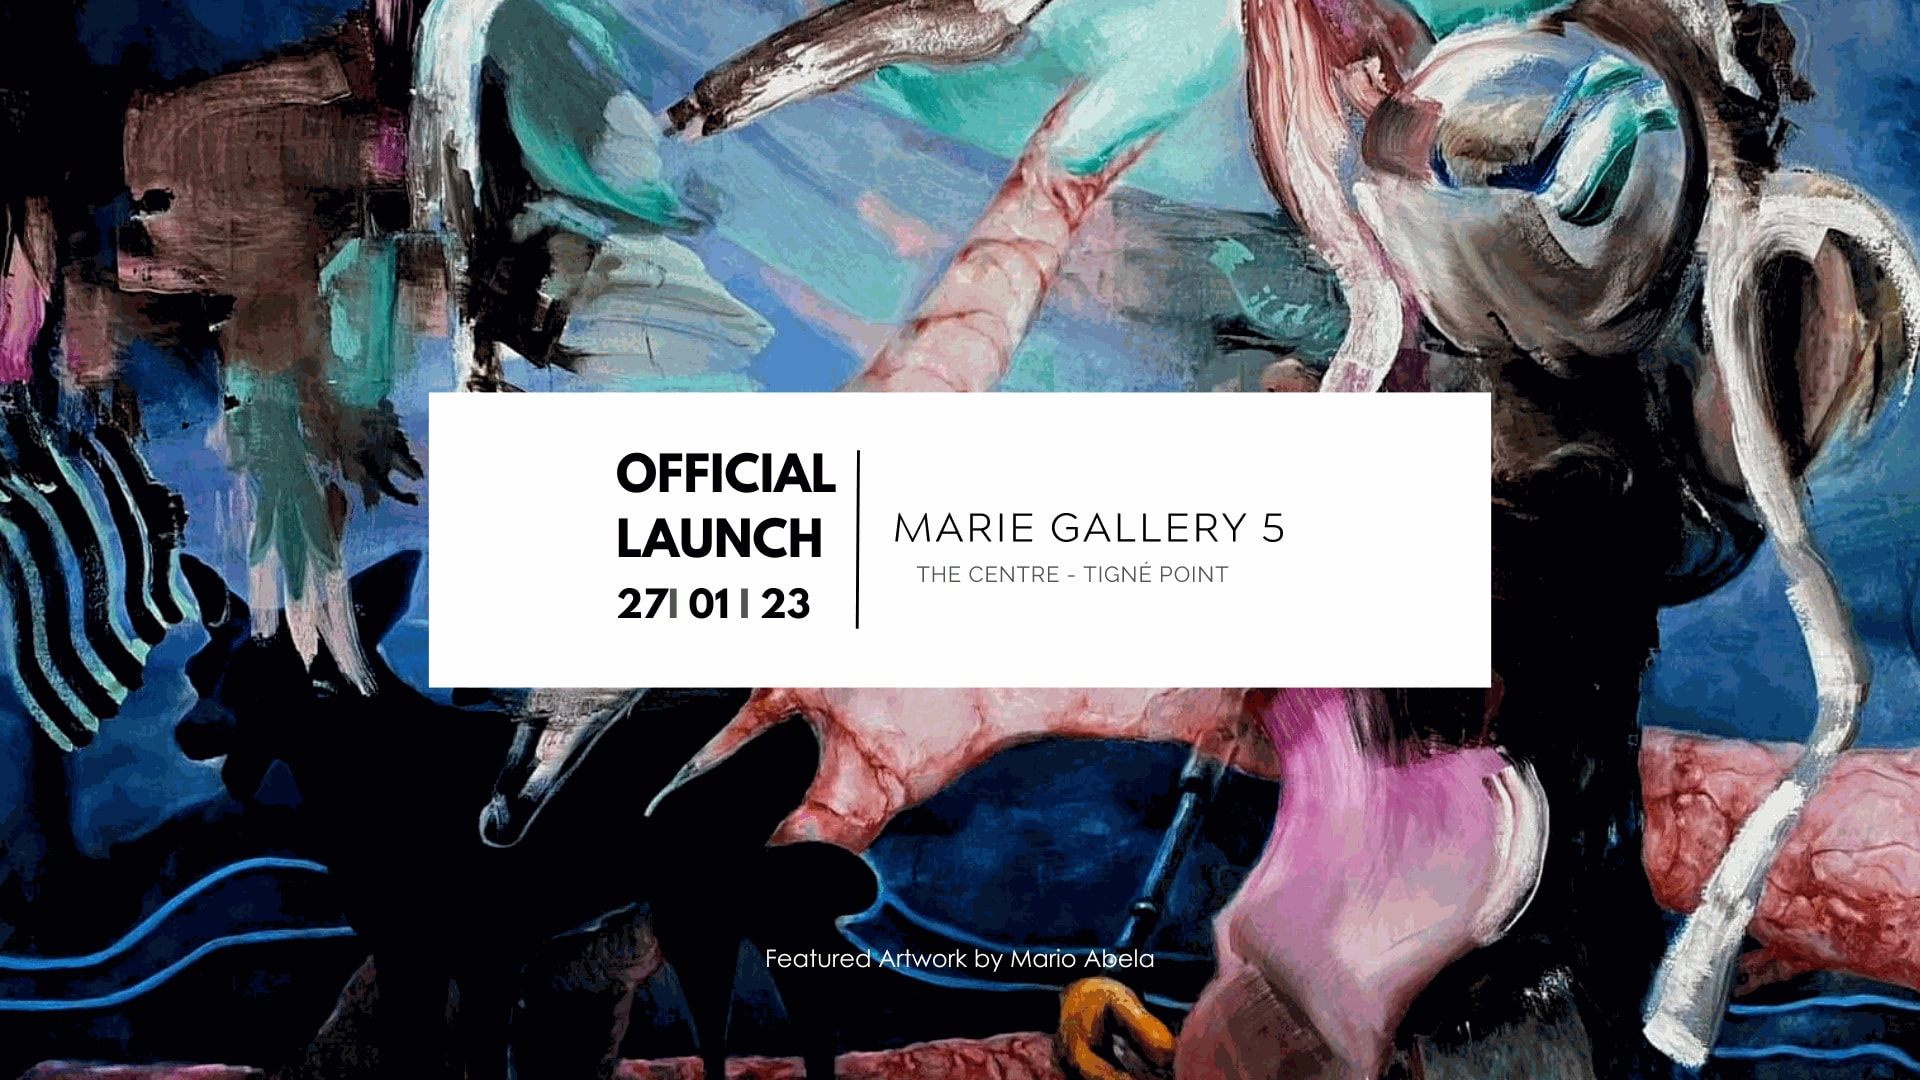 OFFICIAL LAUNCH MARIE GALLERY 5 TIGNE